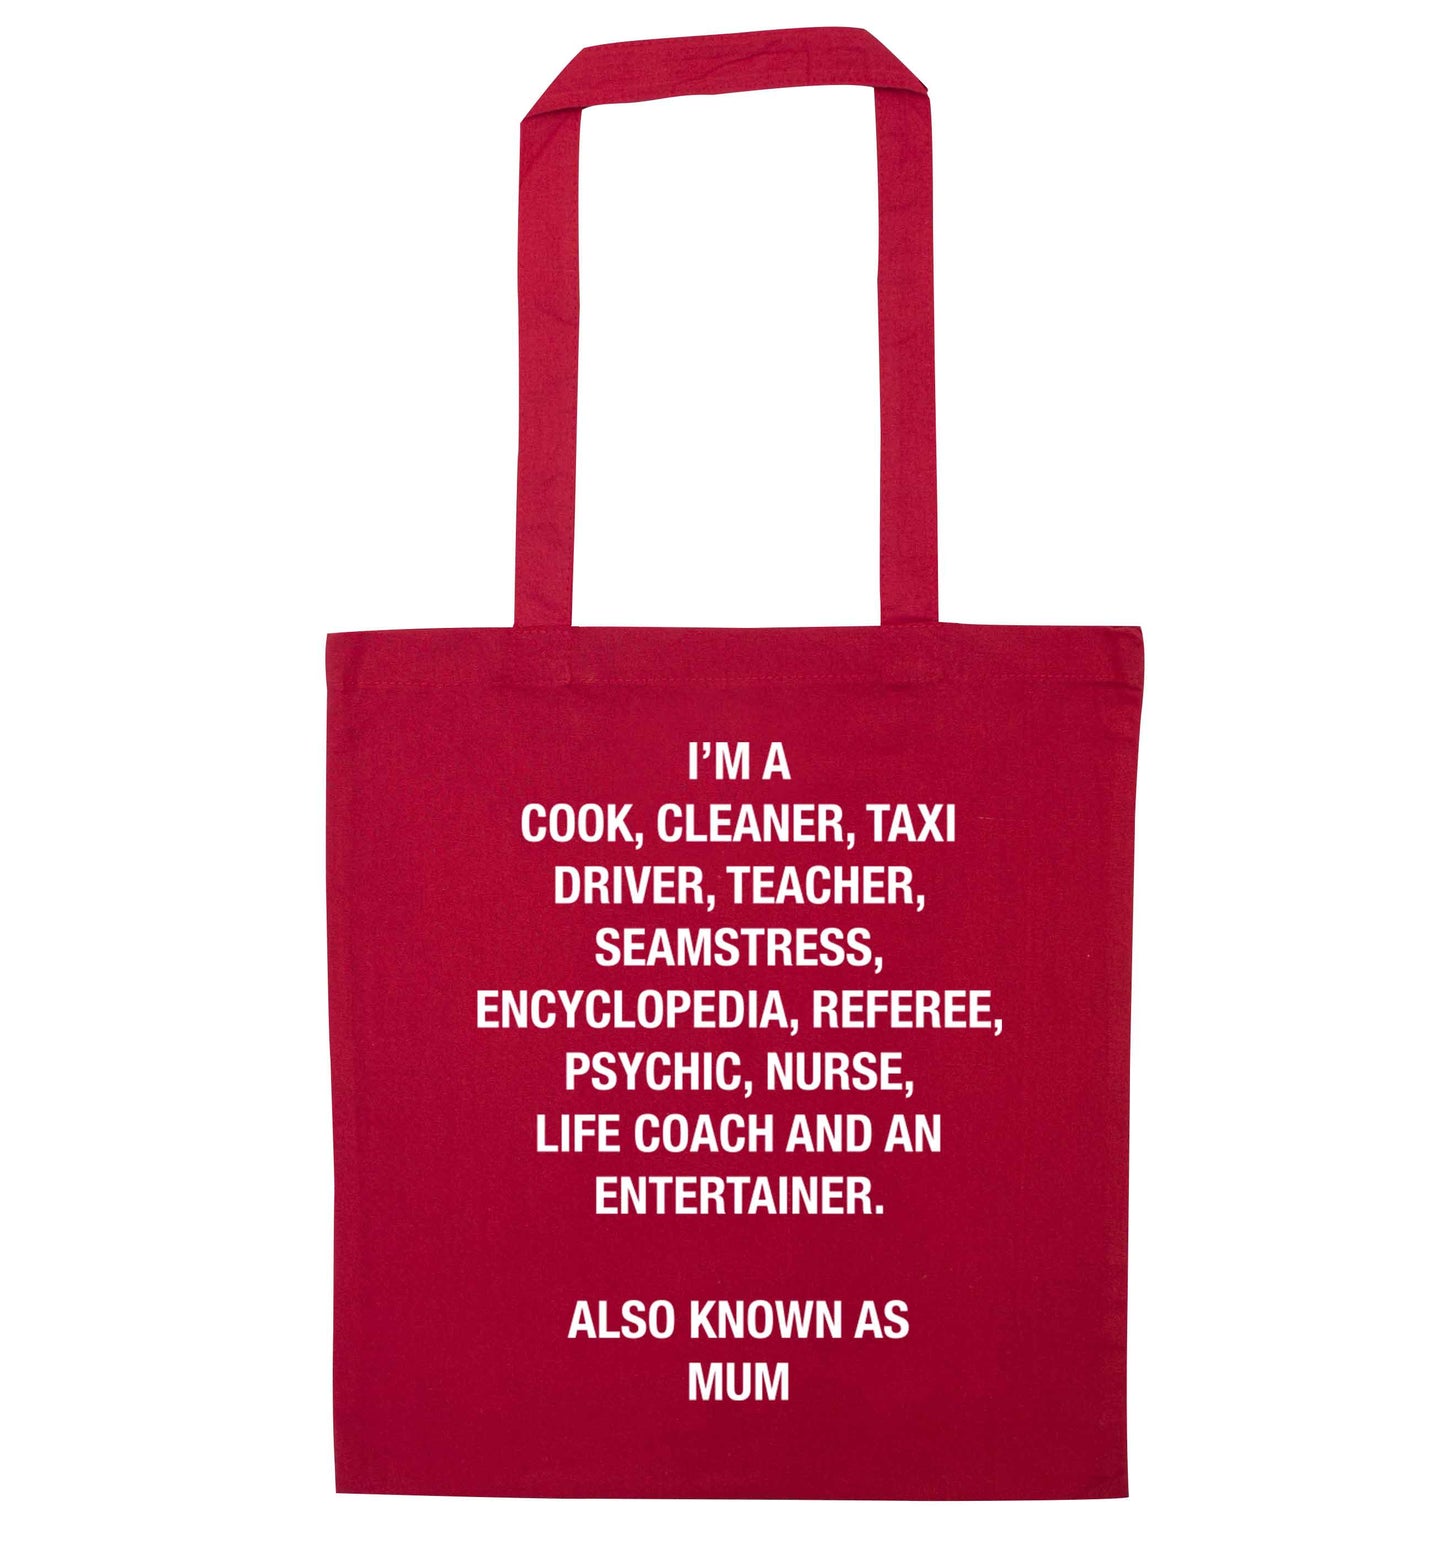 Funny gifts for your mum on mother's dayor her birthday! Mum, cook, cleaner, taxi driver, teacher, seamstress, encyclopedia, referee, psychic, nurse, life coach and entertainer red tote bag